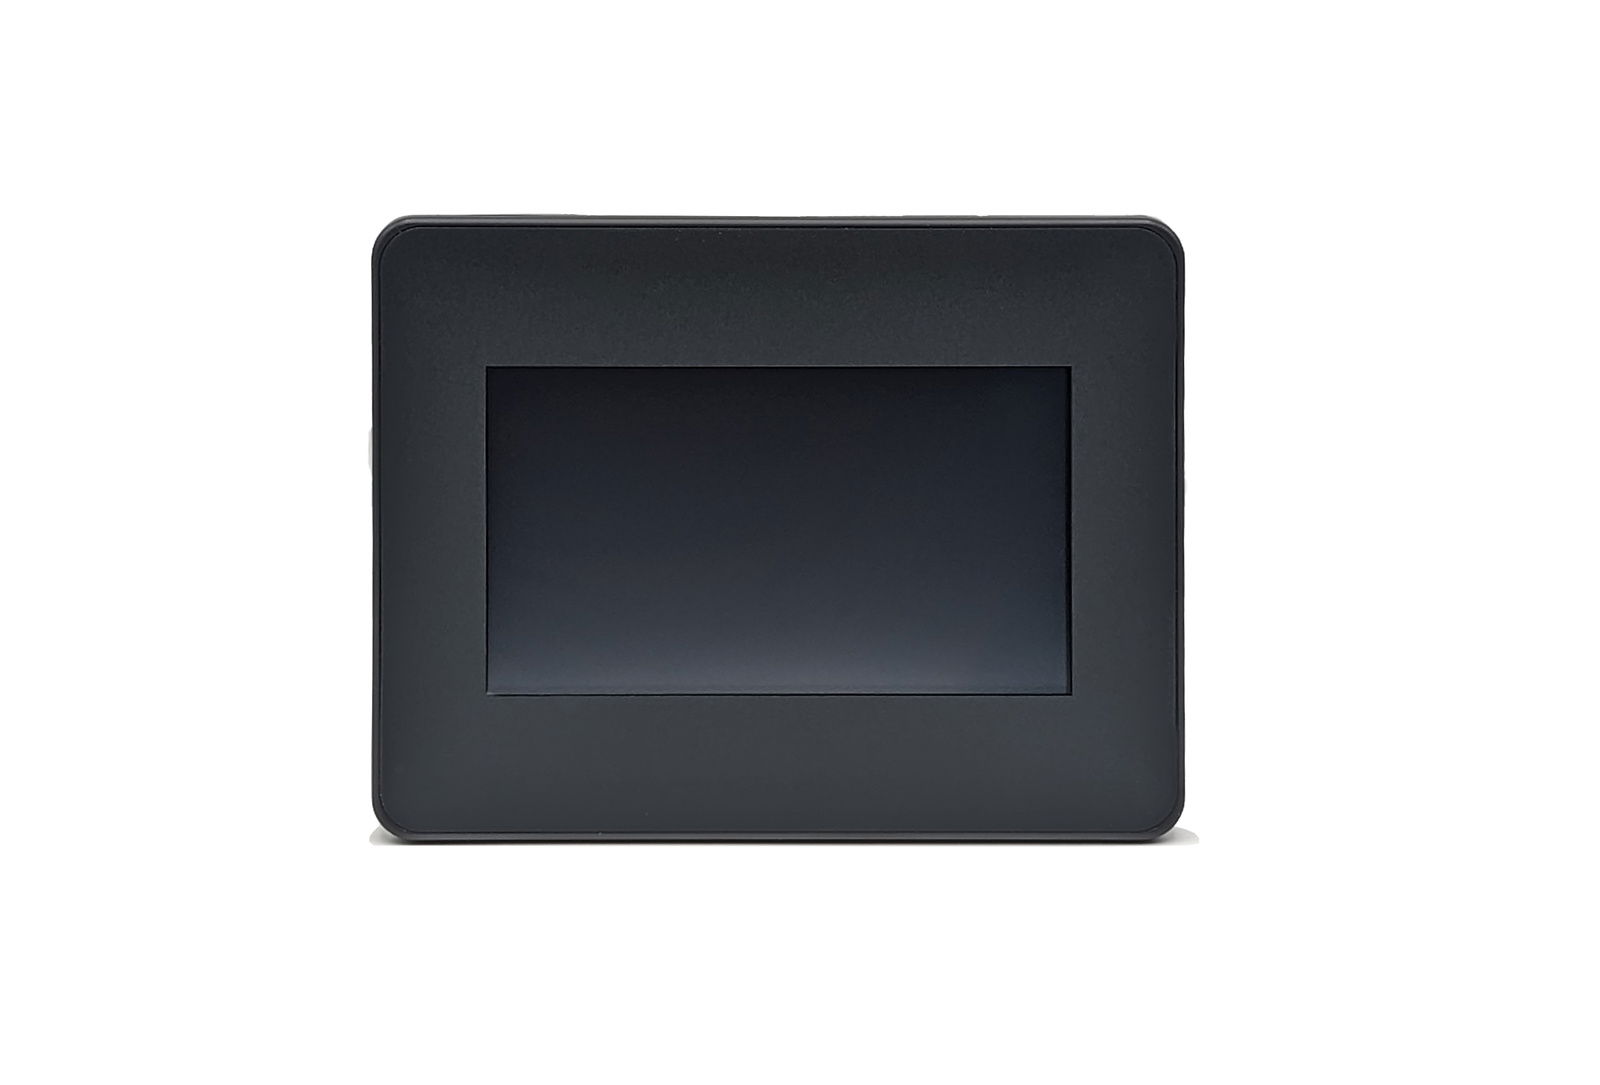 Kinco MK043E-20DT-Blank 4" IoT Series HMI touch panel with Ethernet and integrated PLC without logo